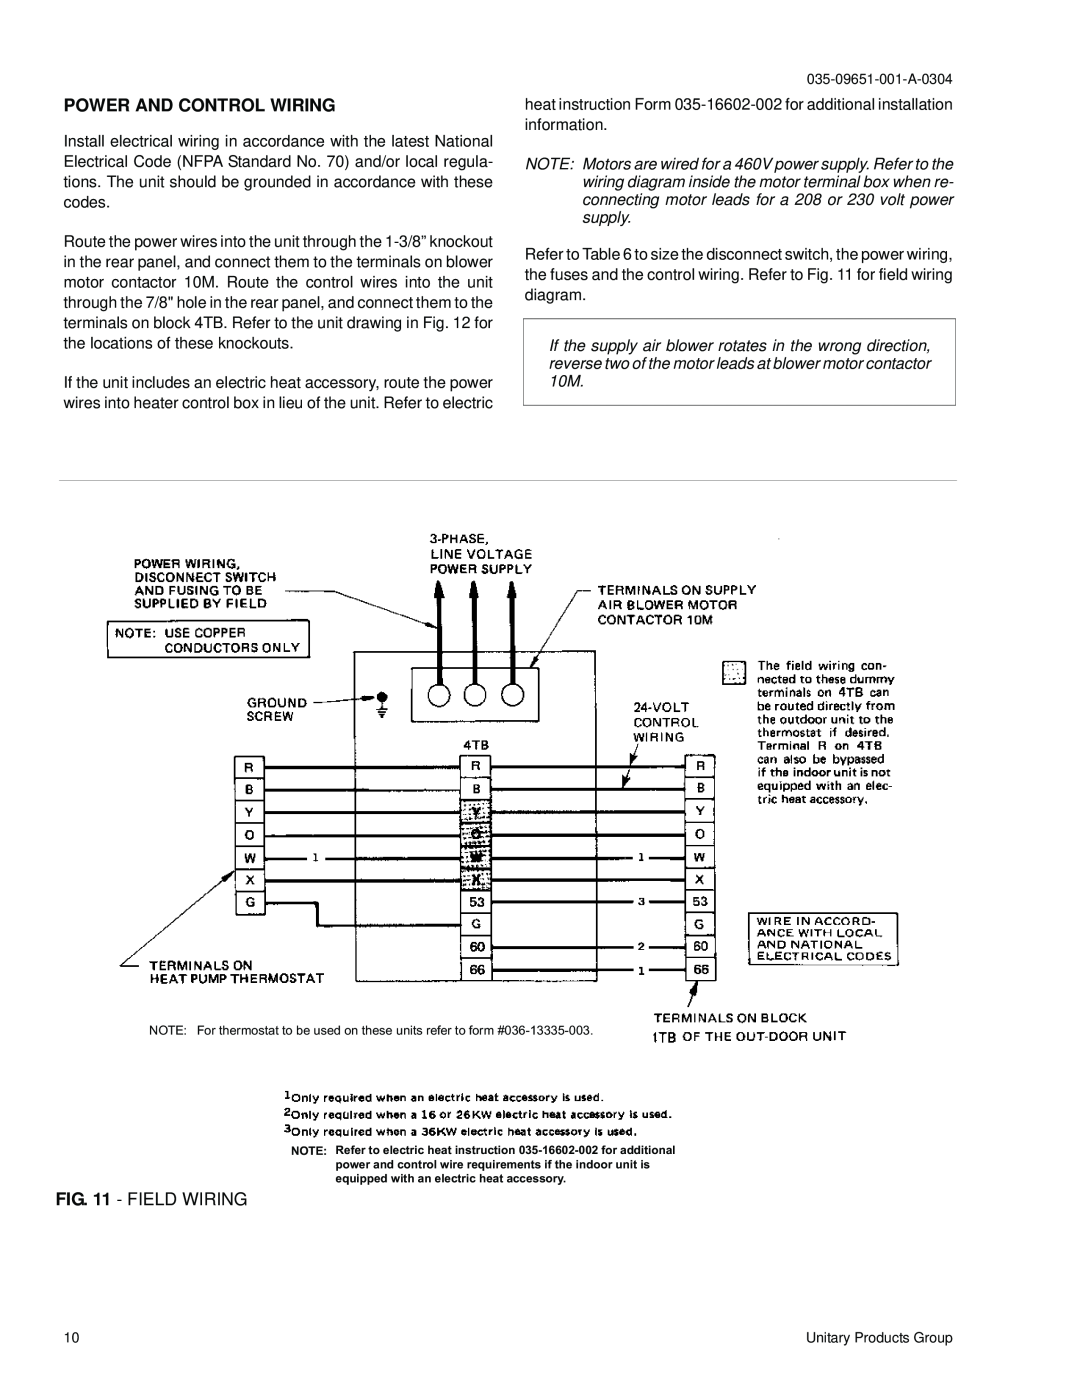 York F3EH090 installation manual Power And Control Wiring, Field Wiring 